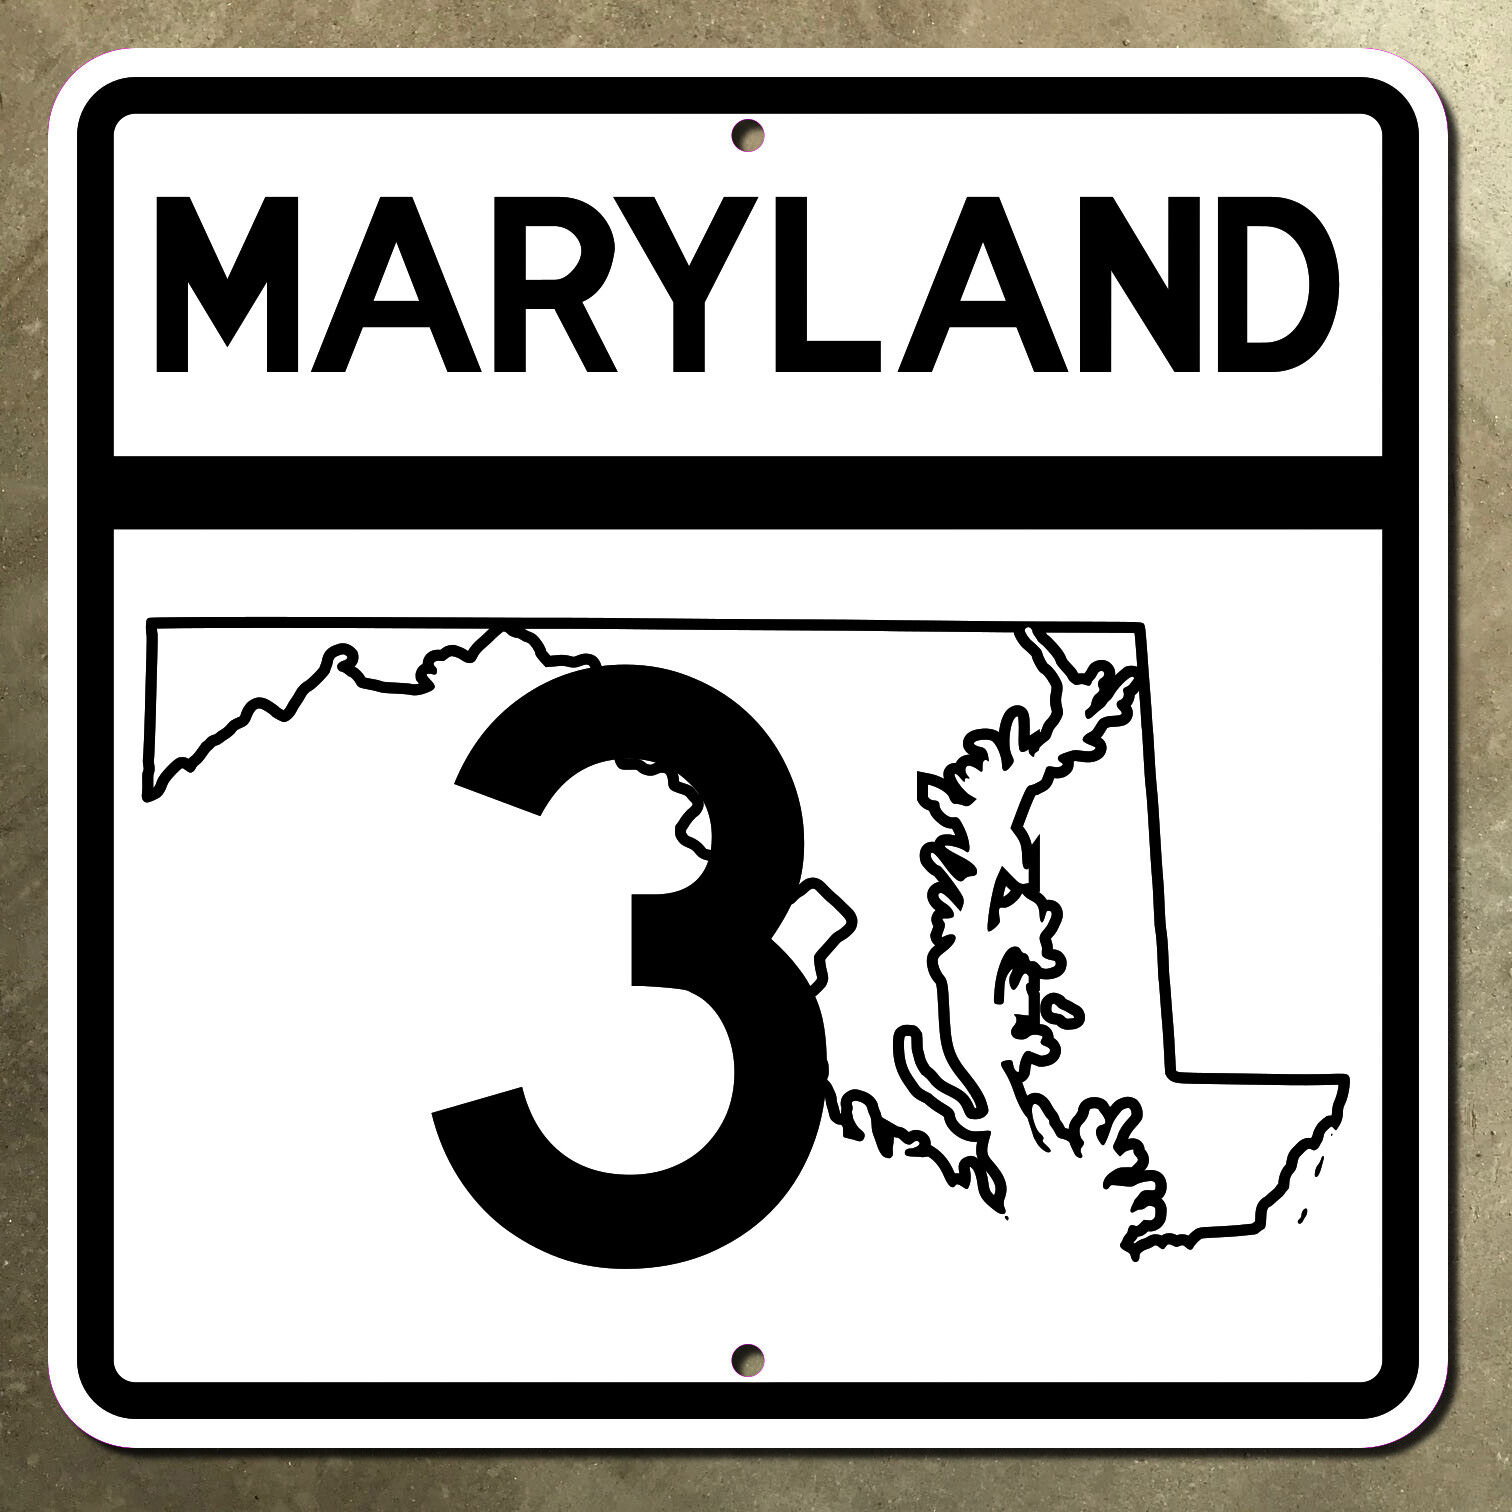 Maryland state route 3 highway marker road sign 1981 test design Bowie 12x12